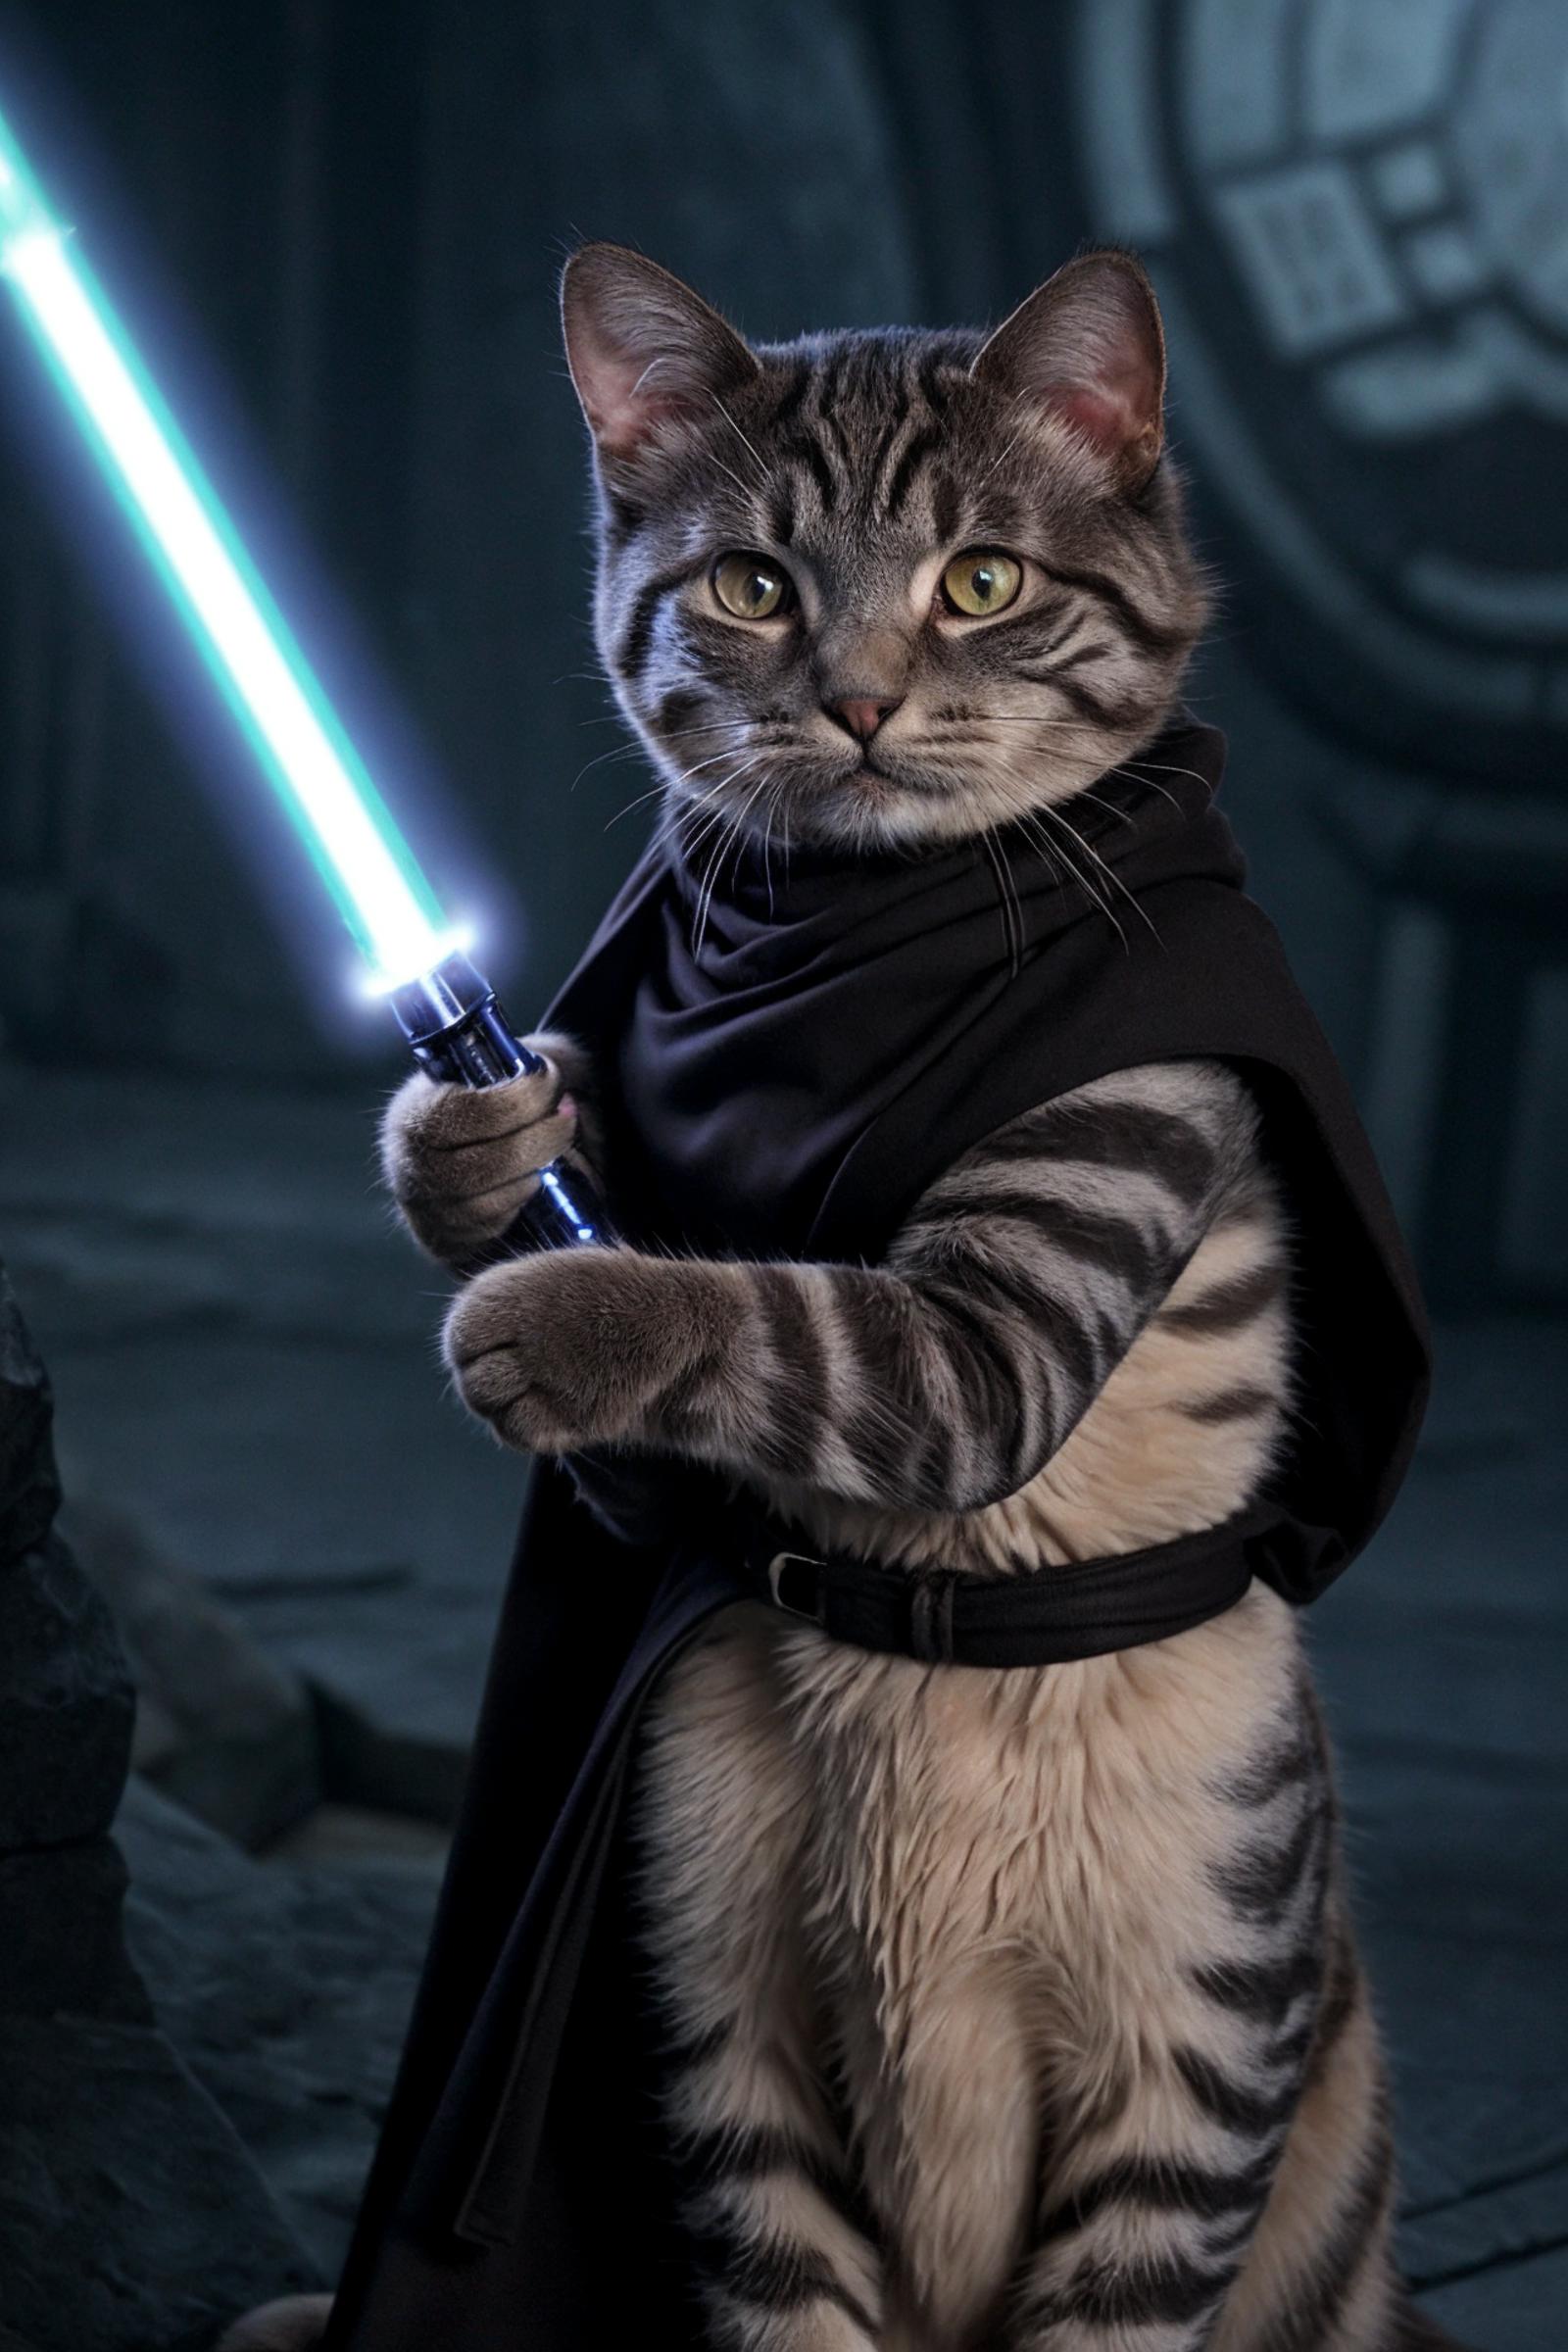 A cat dressed as a Jedi holding a lightsaber.